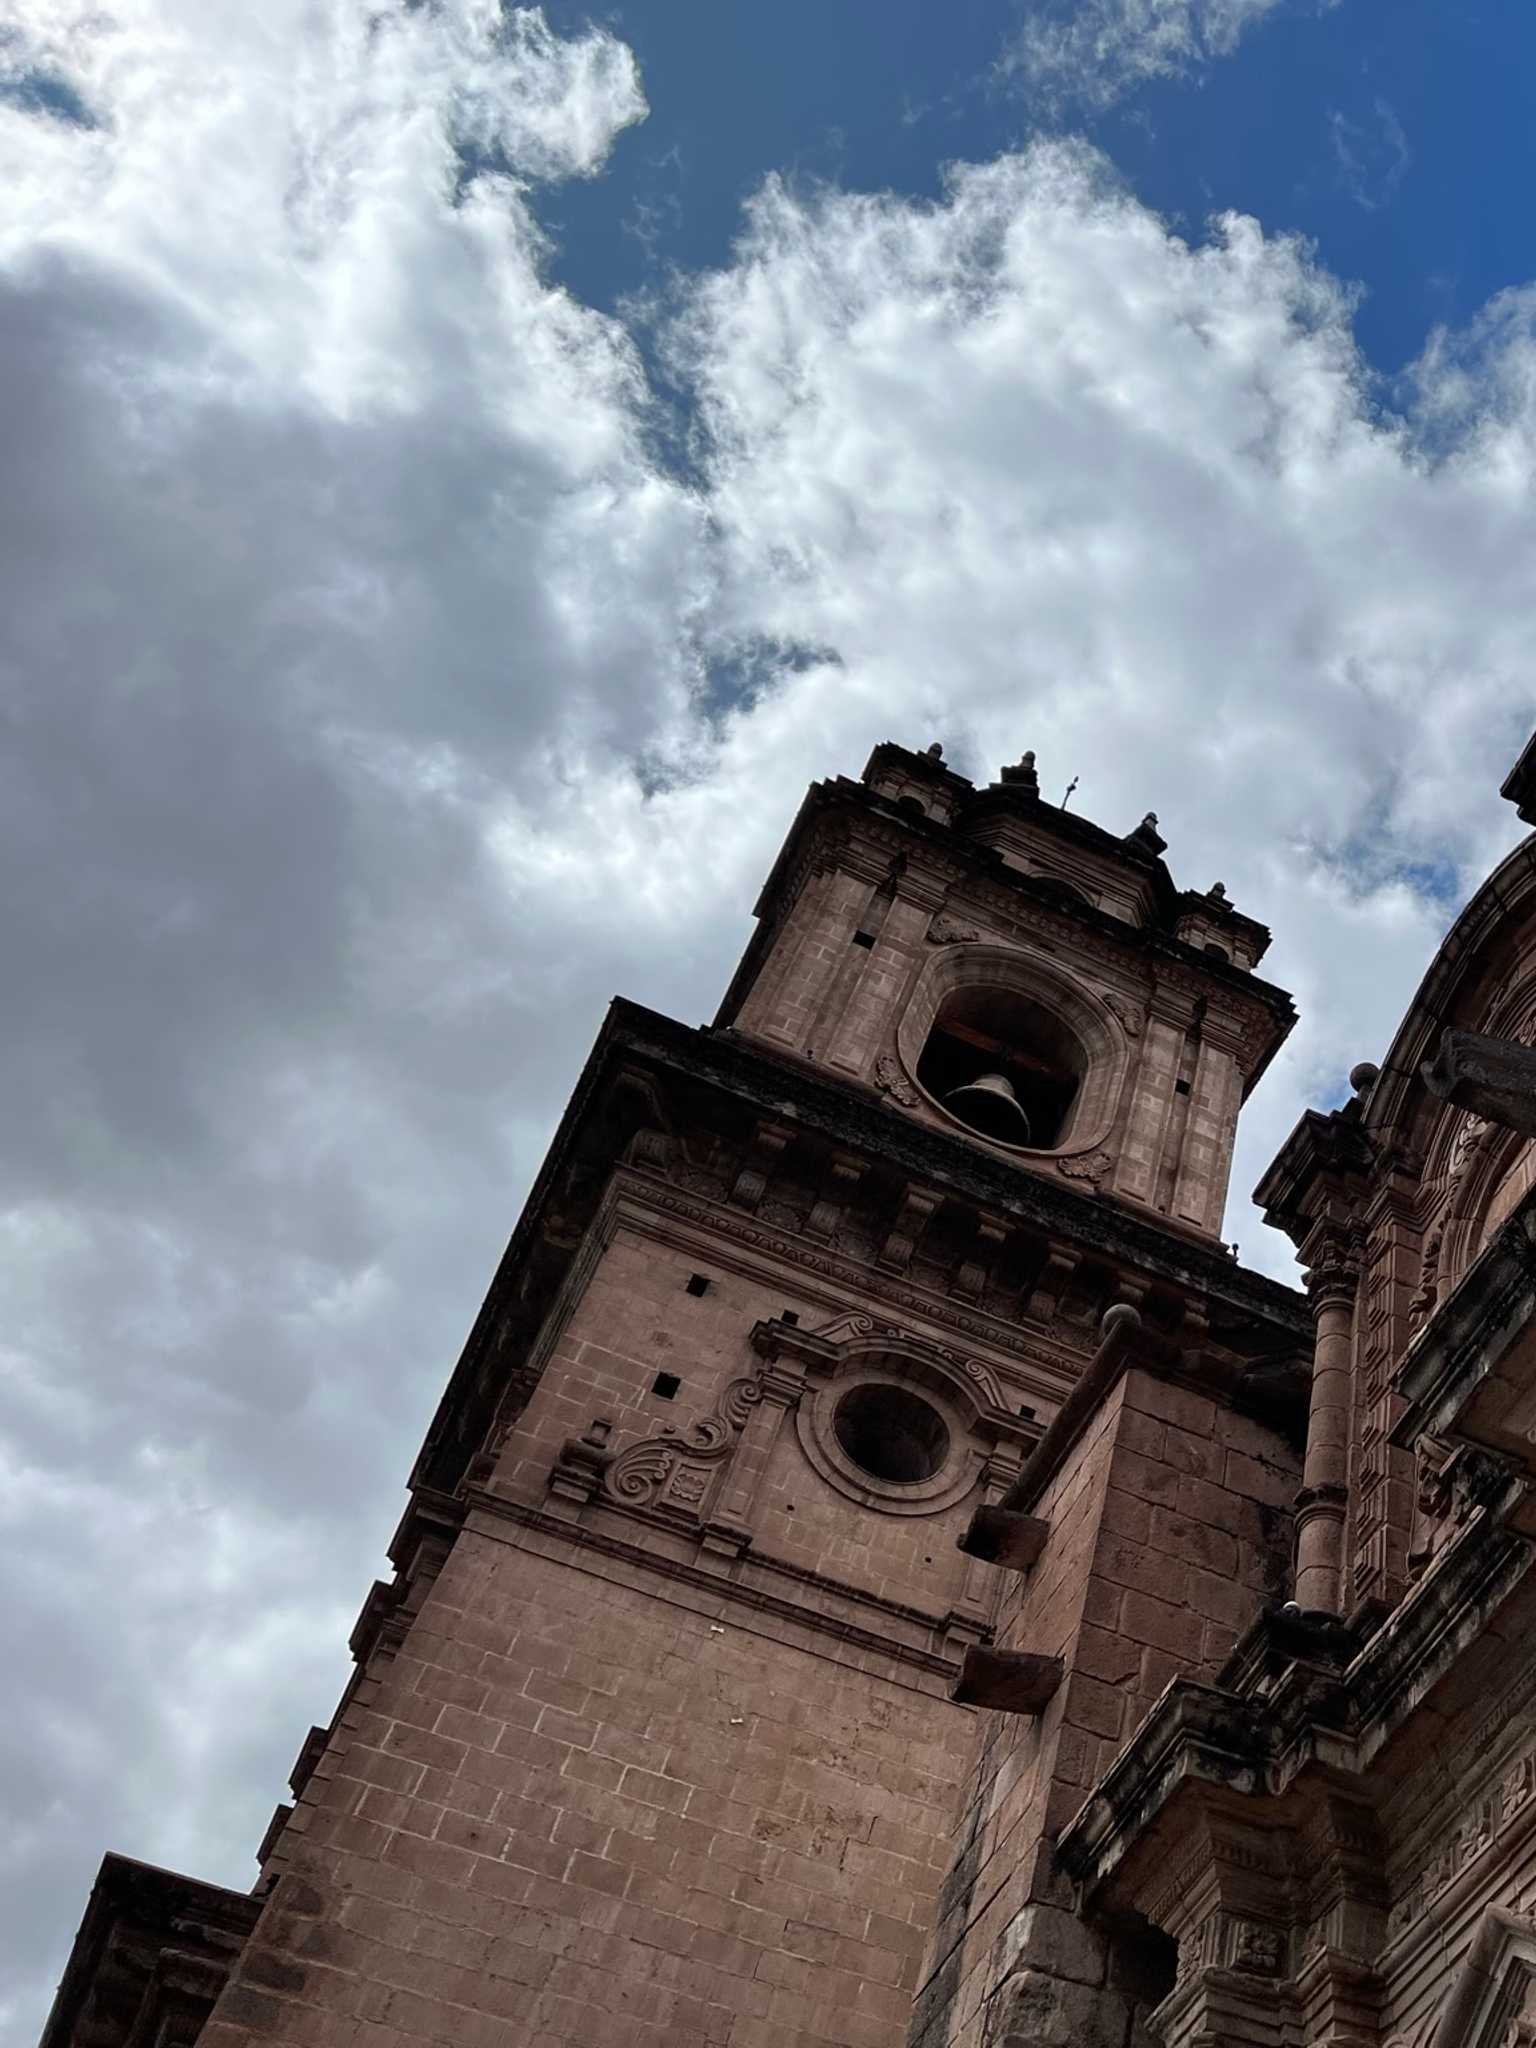 Part of the facade of the Iglesia de la Compañía de Jesús (Church of the Society of Jesus) in Cusco's Plaza de Armas, the city center. Built atop an Inca palace, it is one of the best examples of Spanish Baroque architecture in Peru and its design greatly influenced the development of Baroque architecture in the South Andes. Begun in 1576, the church was badly damaged in an earthquake in 1650; its rebuilding was completed in 1673.